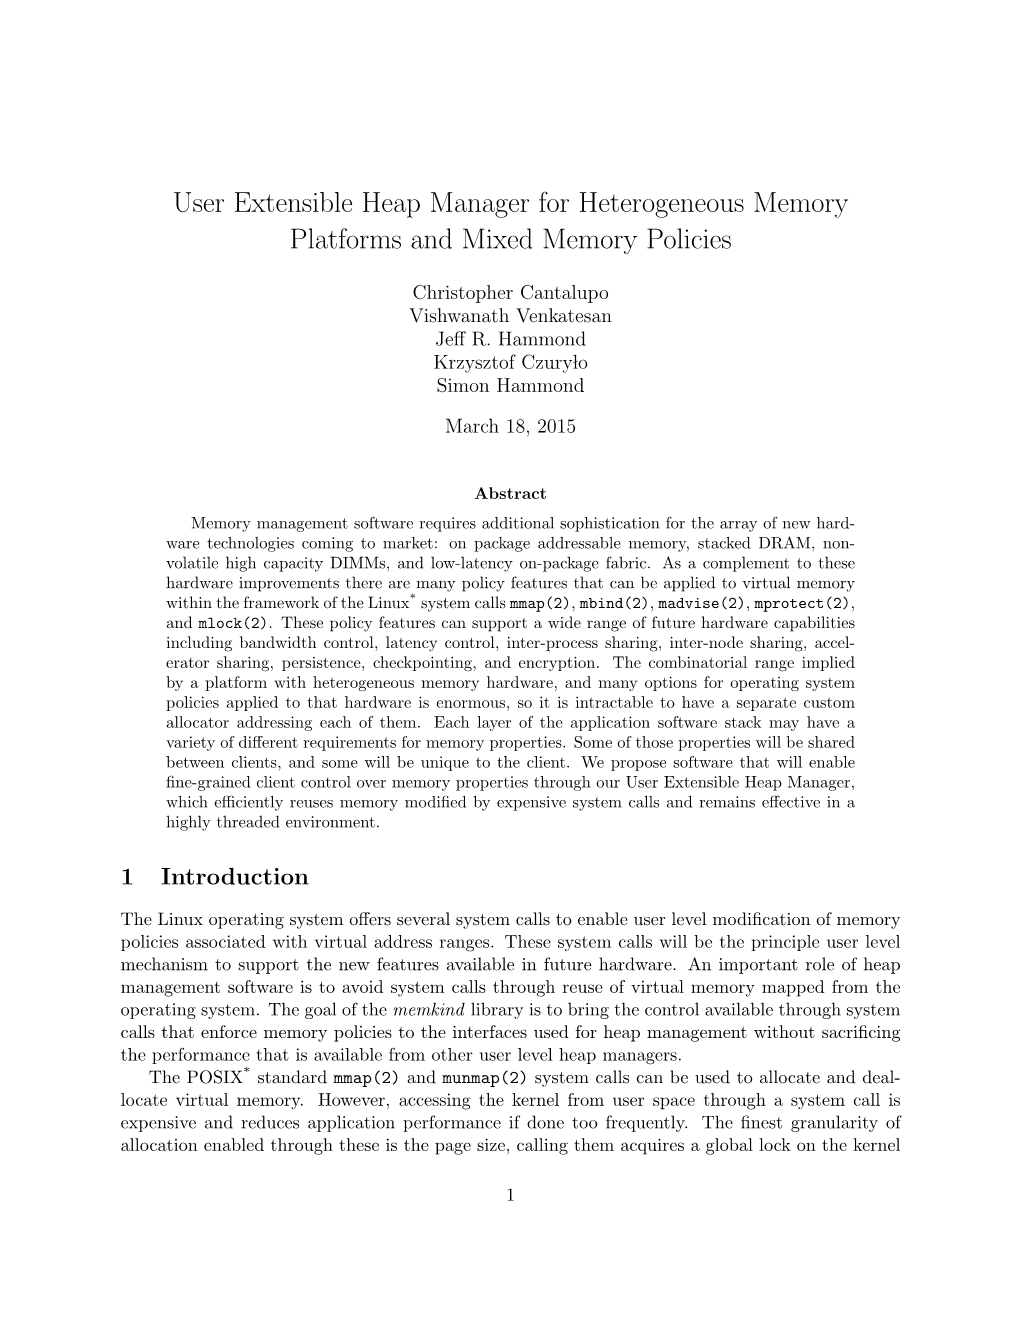 User Extensible Heap Manager for Heterogeneous Memory Platforms and Mixed Memory Policies